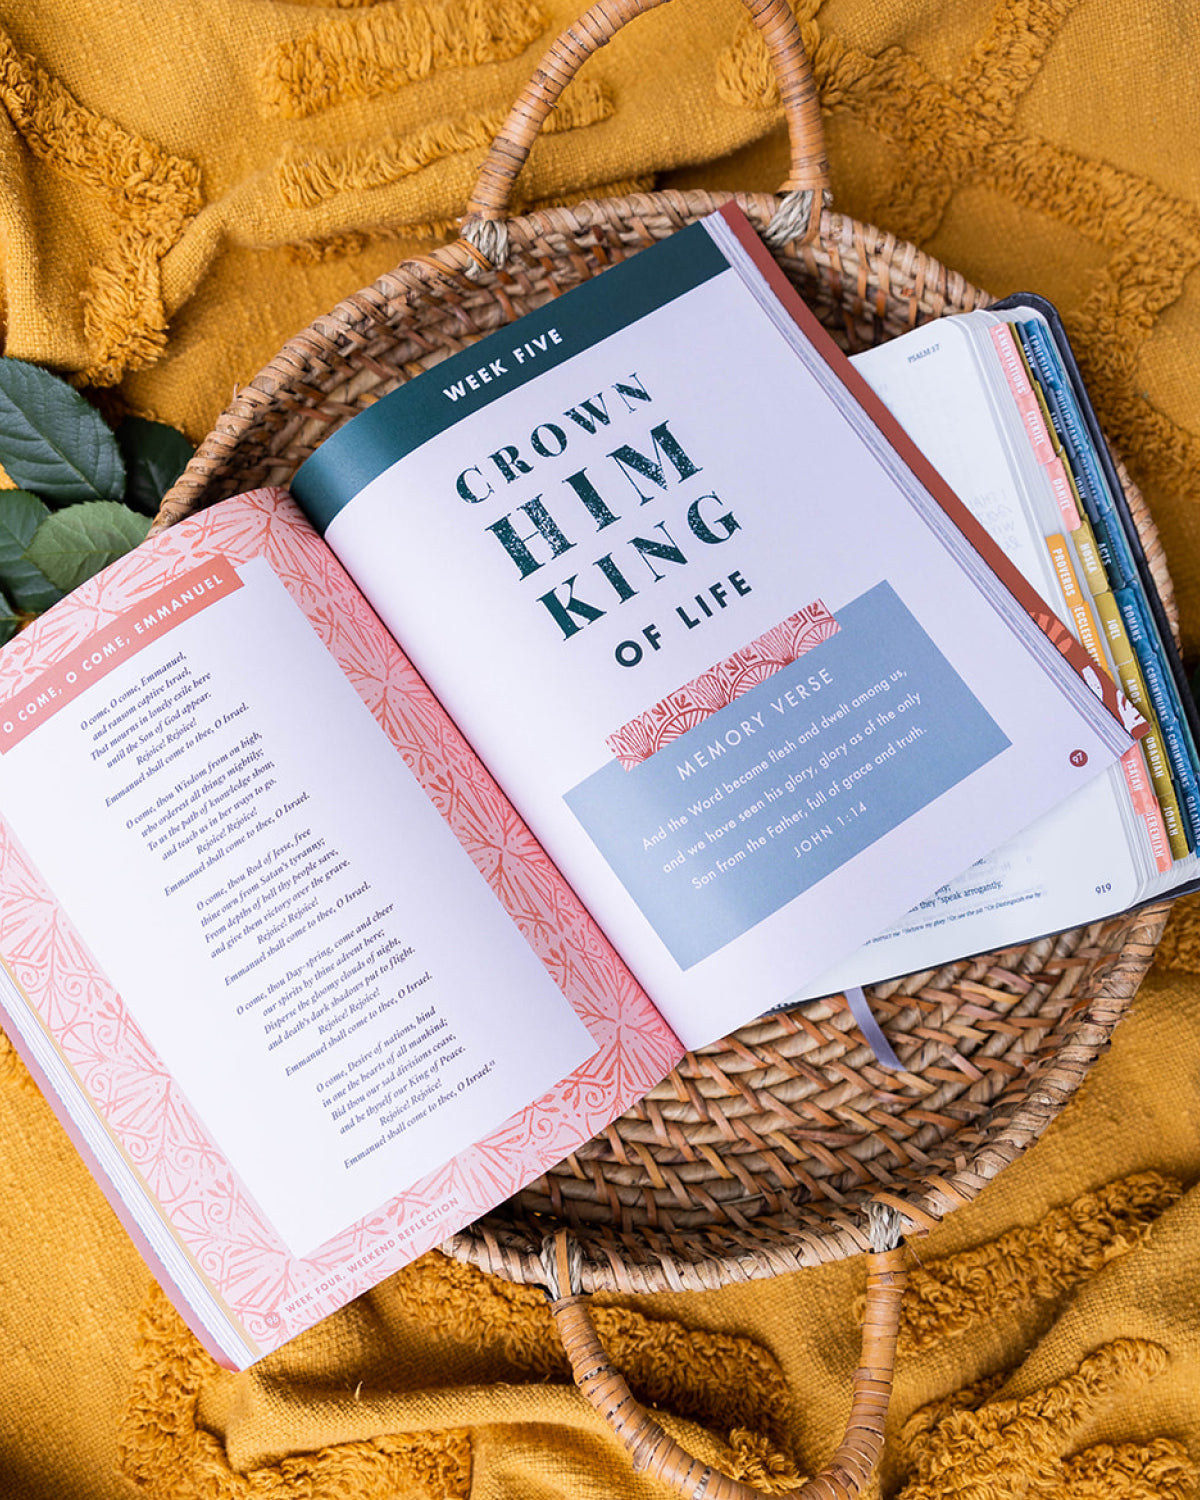 Crown Him King: A Bible Study on the Kingdom of God